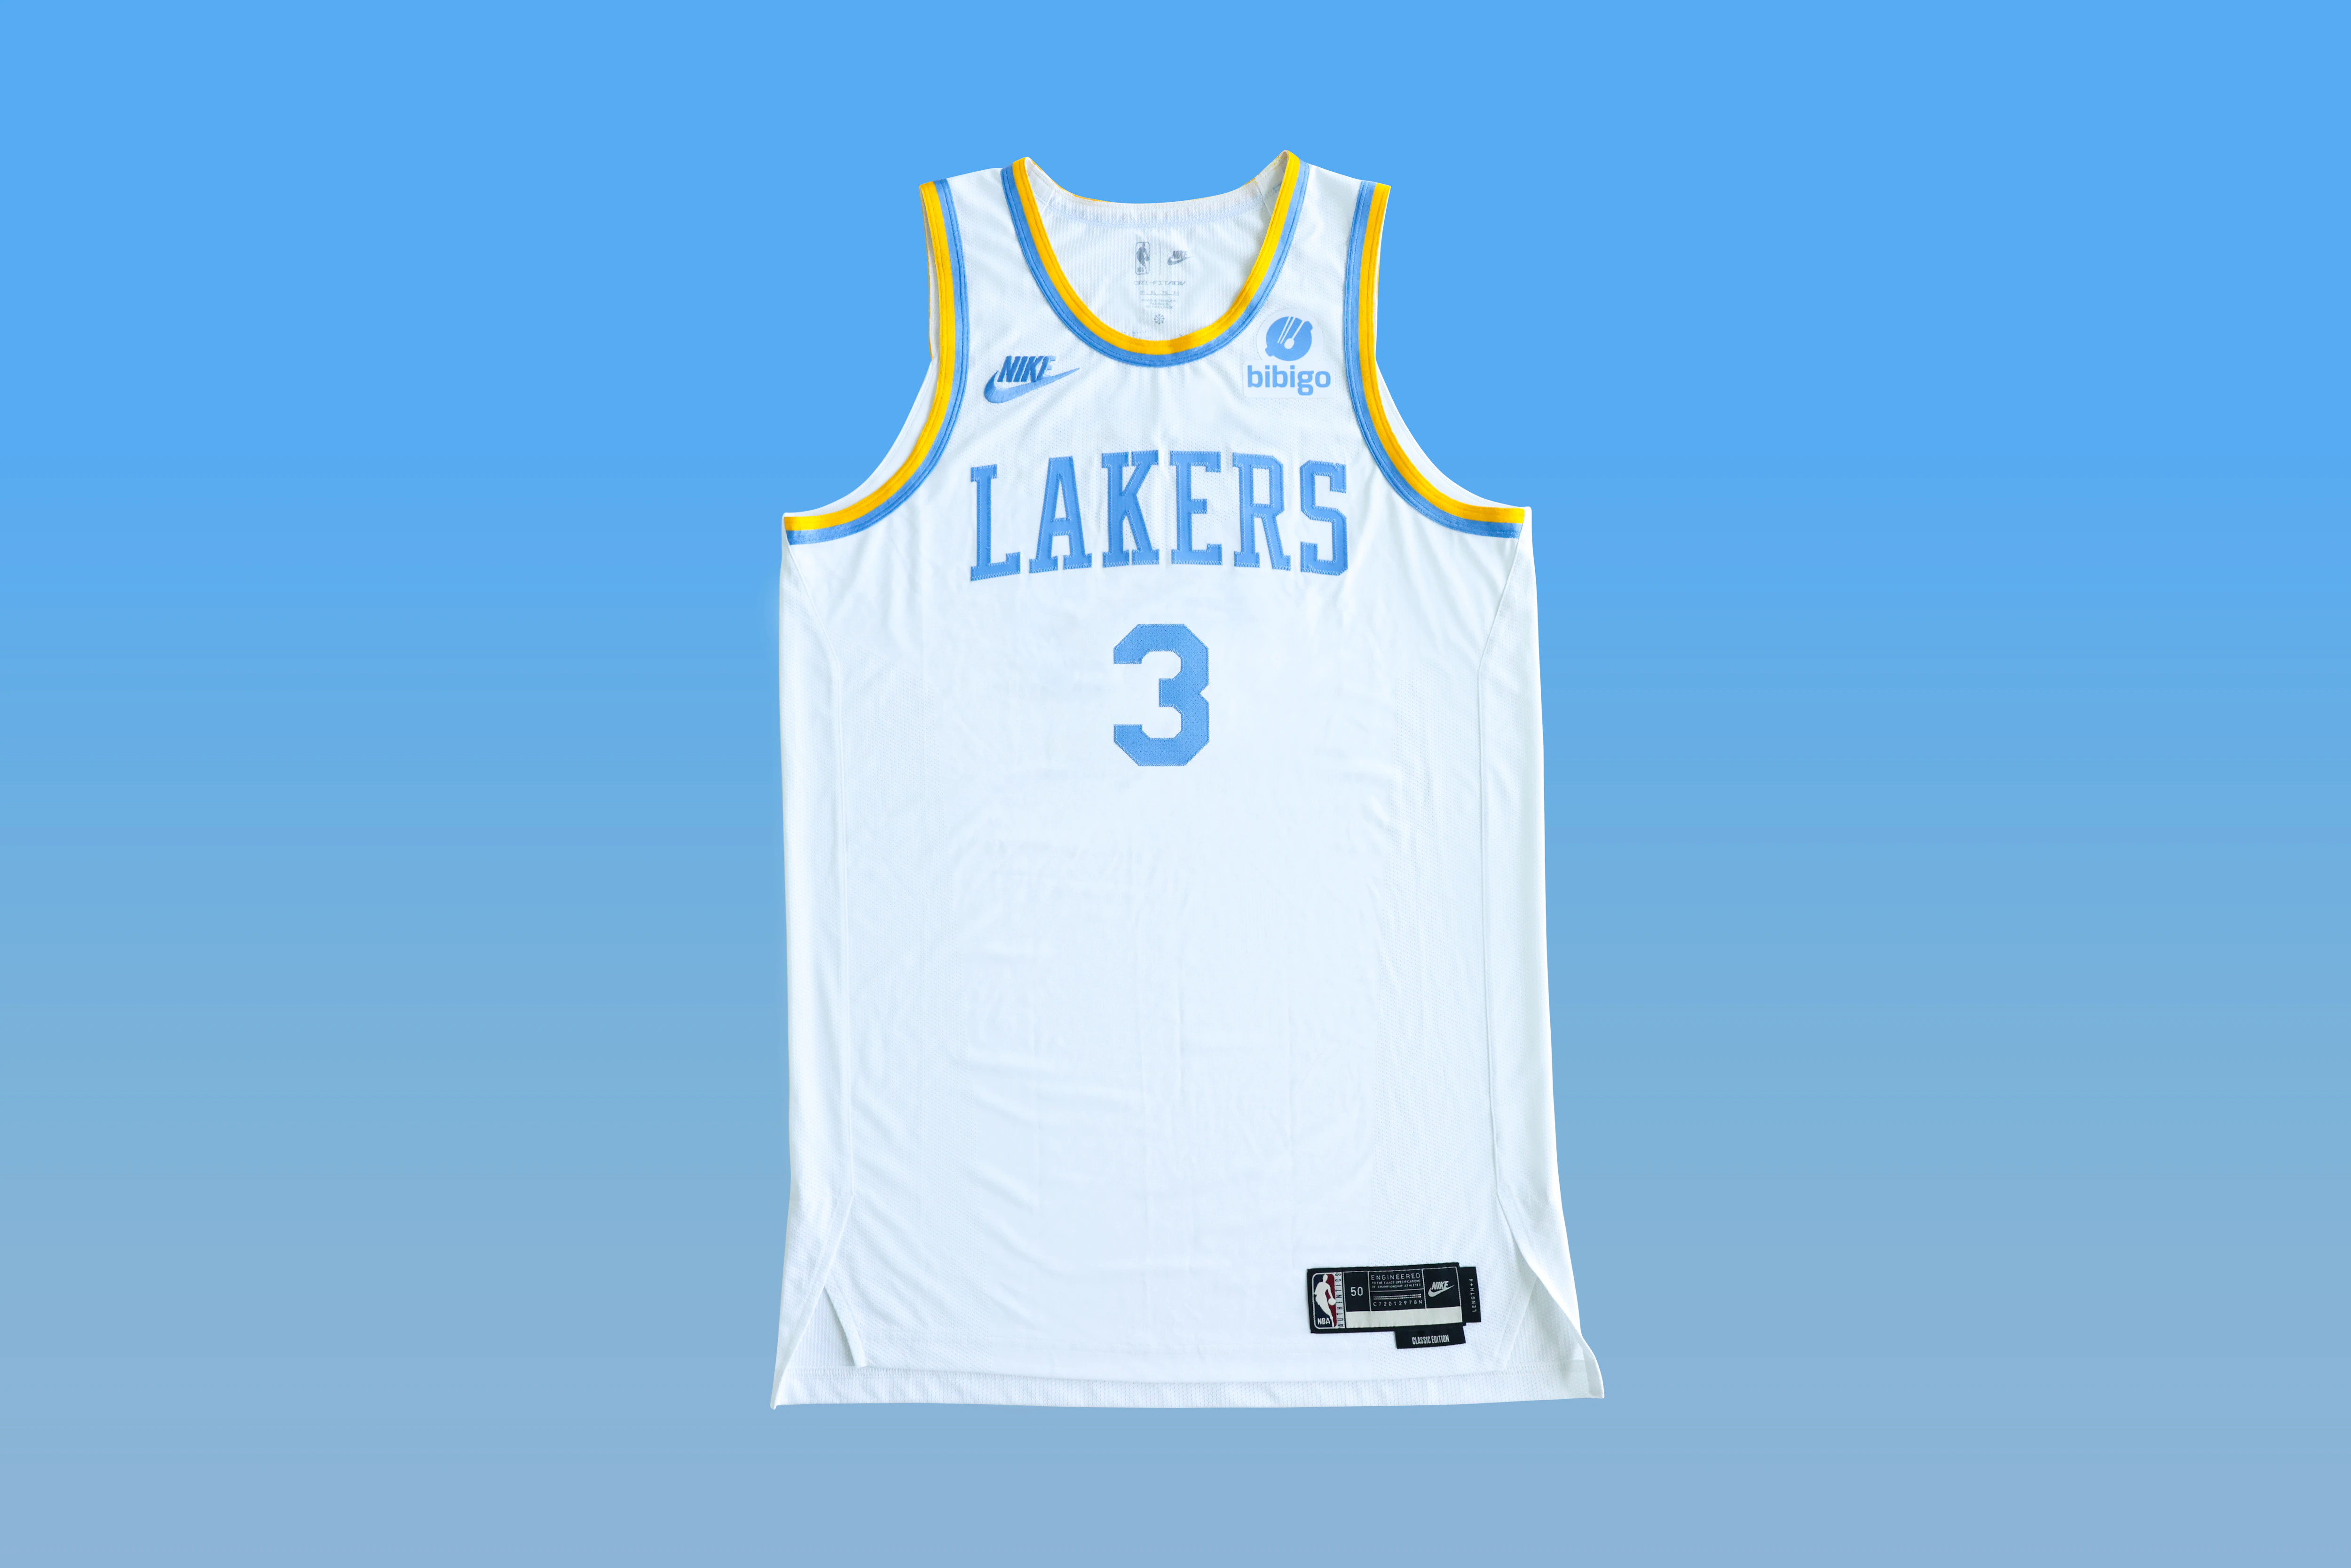 Bold move or respect? Lakers to wear classic Minneapolis jersey in Minnesota